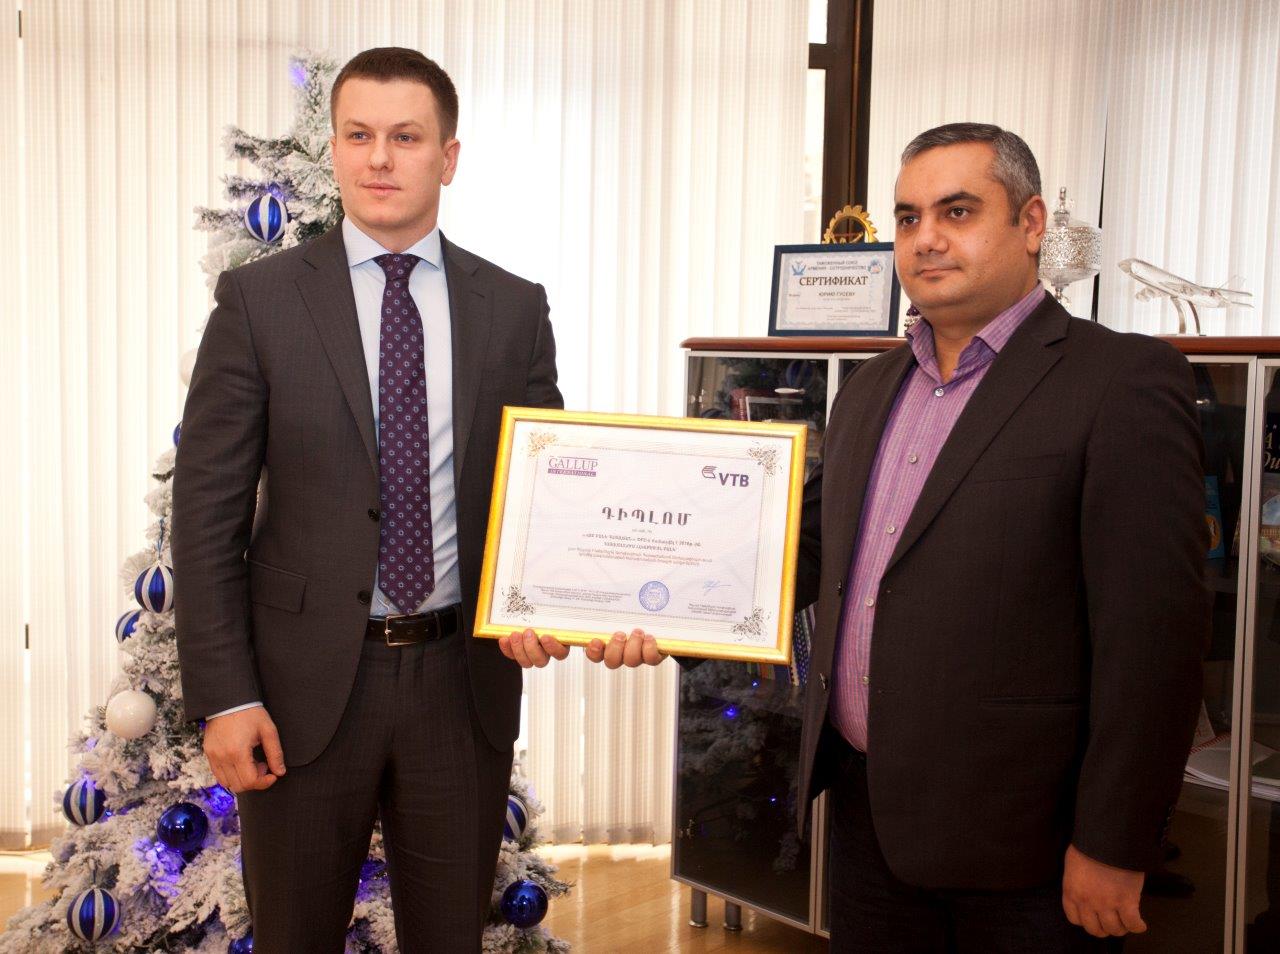 VTB Bank (Armenia) awarded ``The best bank of Armenia`` for the 3rd year in a raw by the Gallup International Association